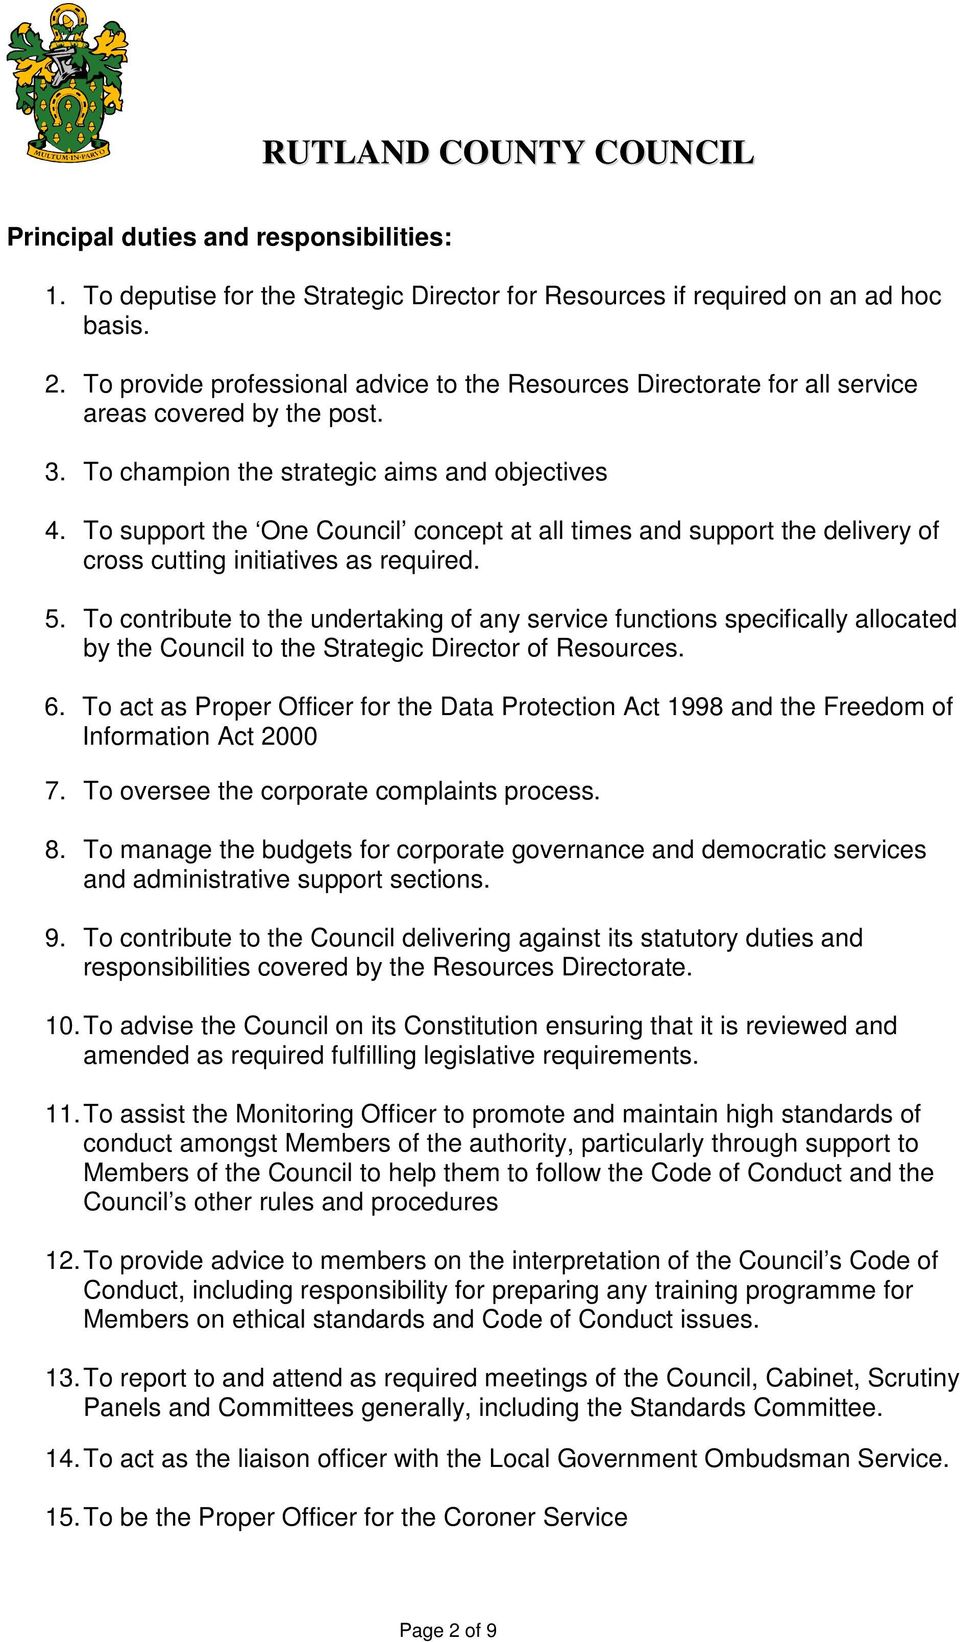 To support the One Council concept at all times and support the delivery of cross cutting initiatives as required. 5.